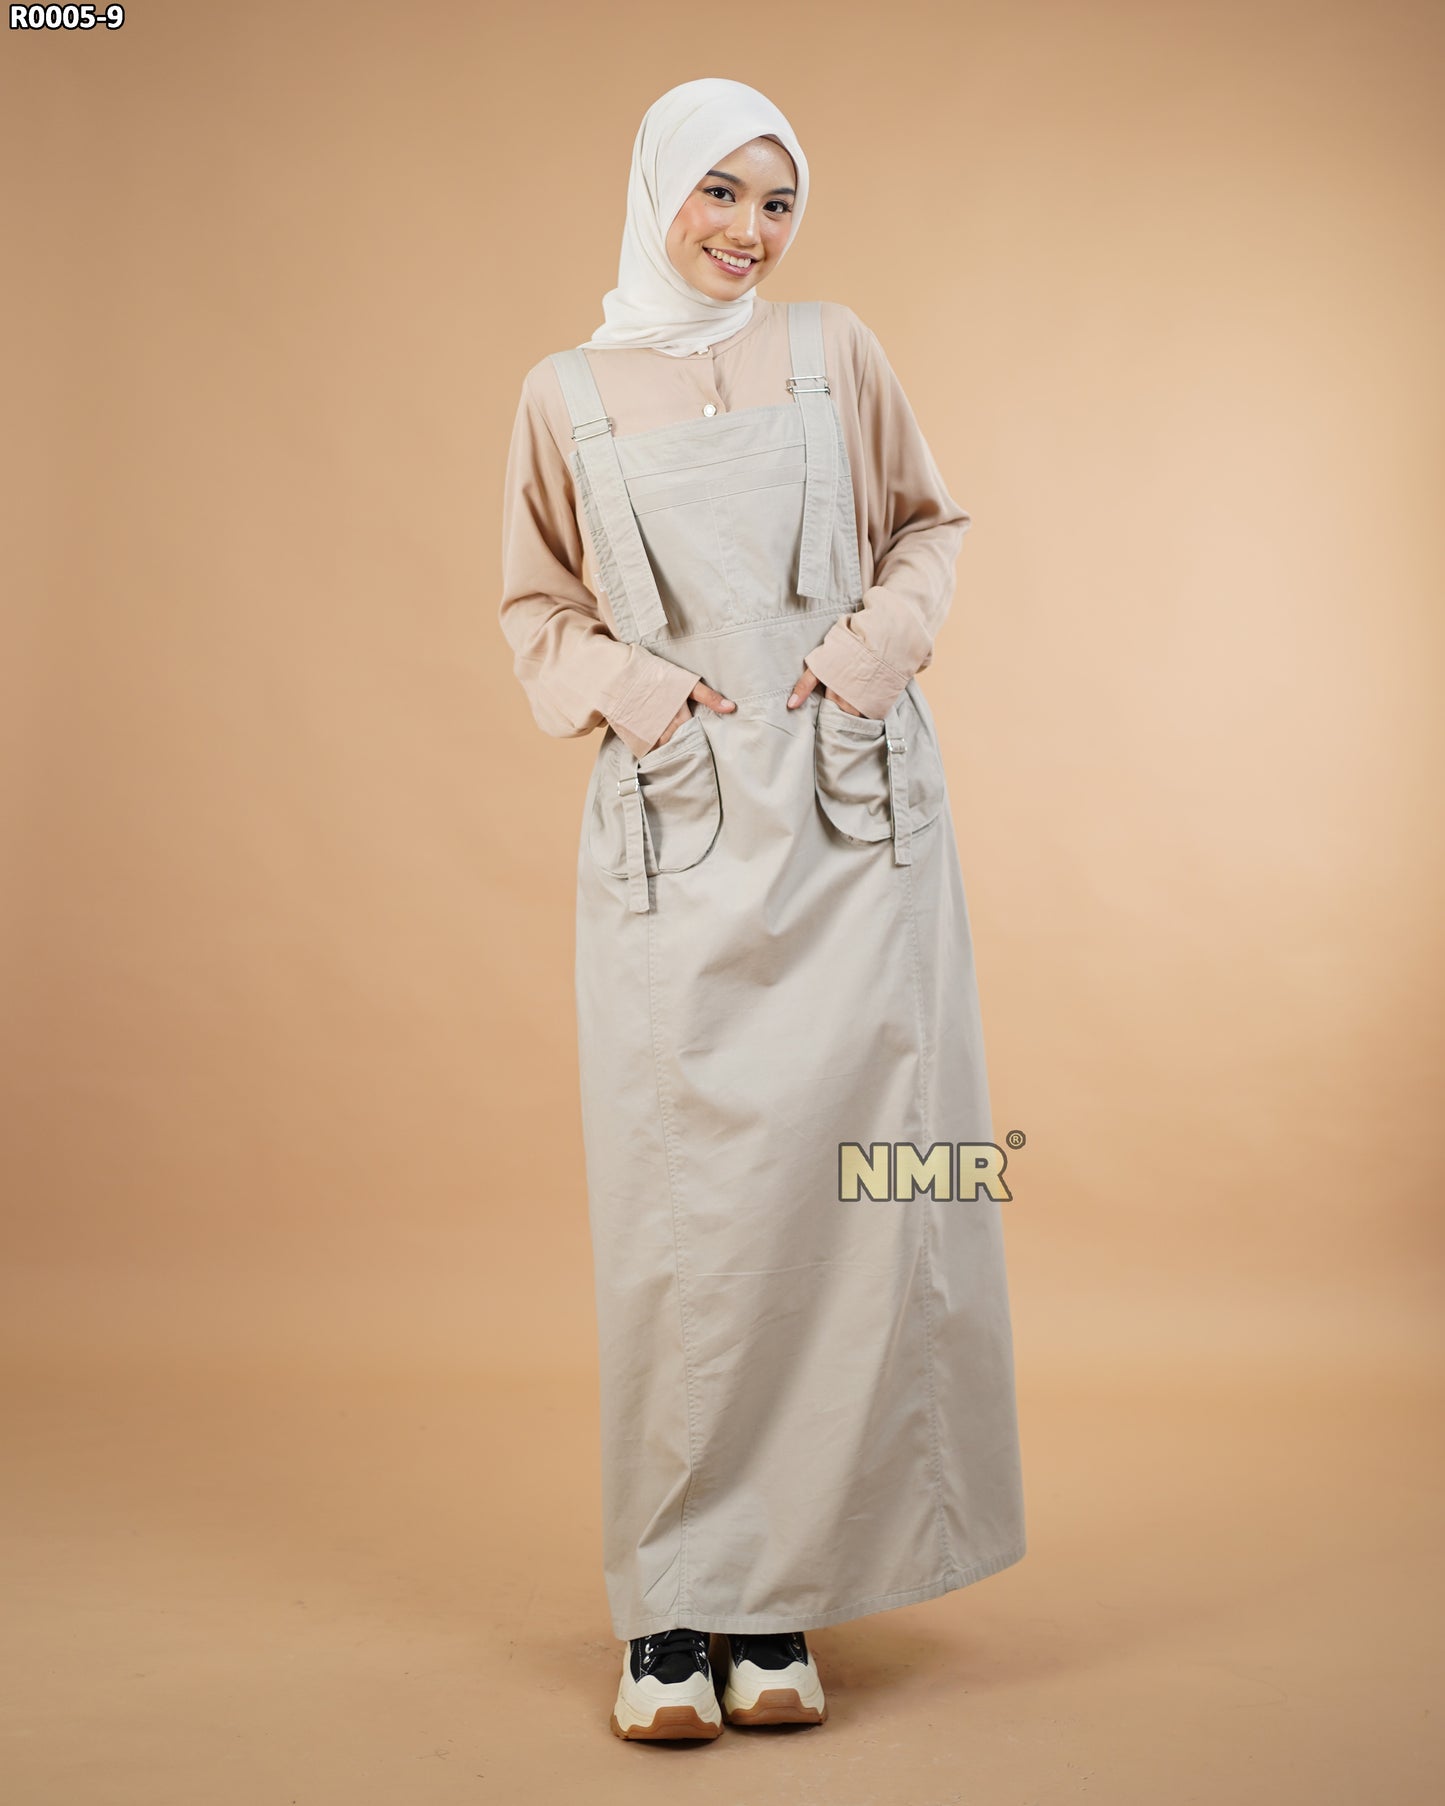 NMR Gamis Jumpsuit Overall Baby Canvas Vol R0005-9